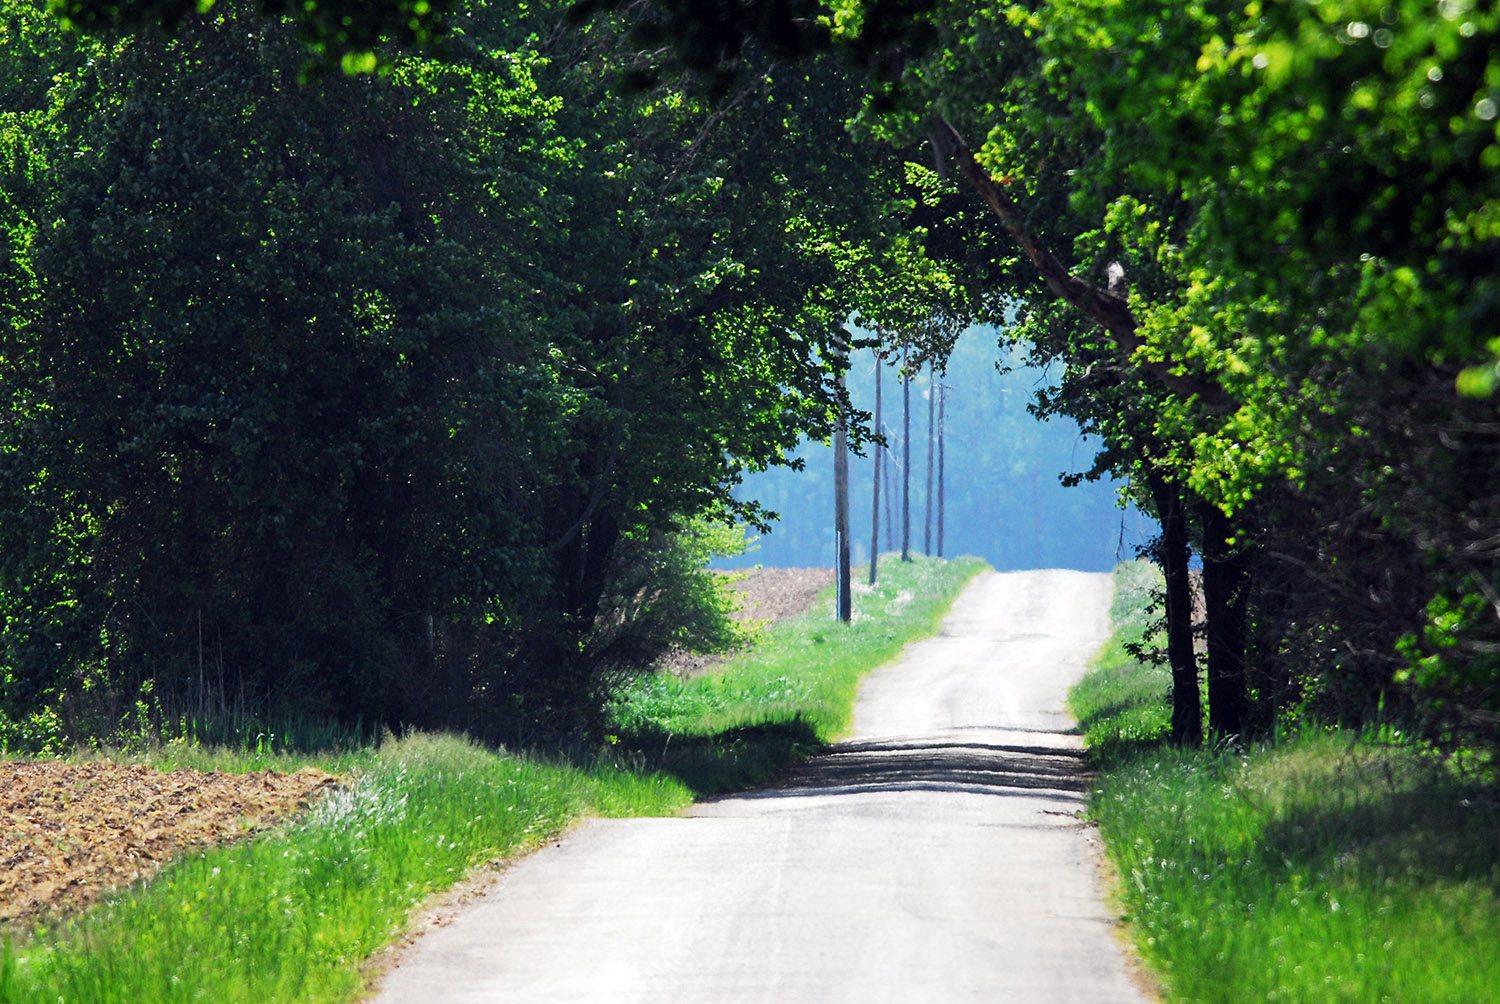 Country_Road_Kent_County_Delaware_Trees_Entrance.jpg